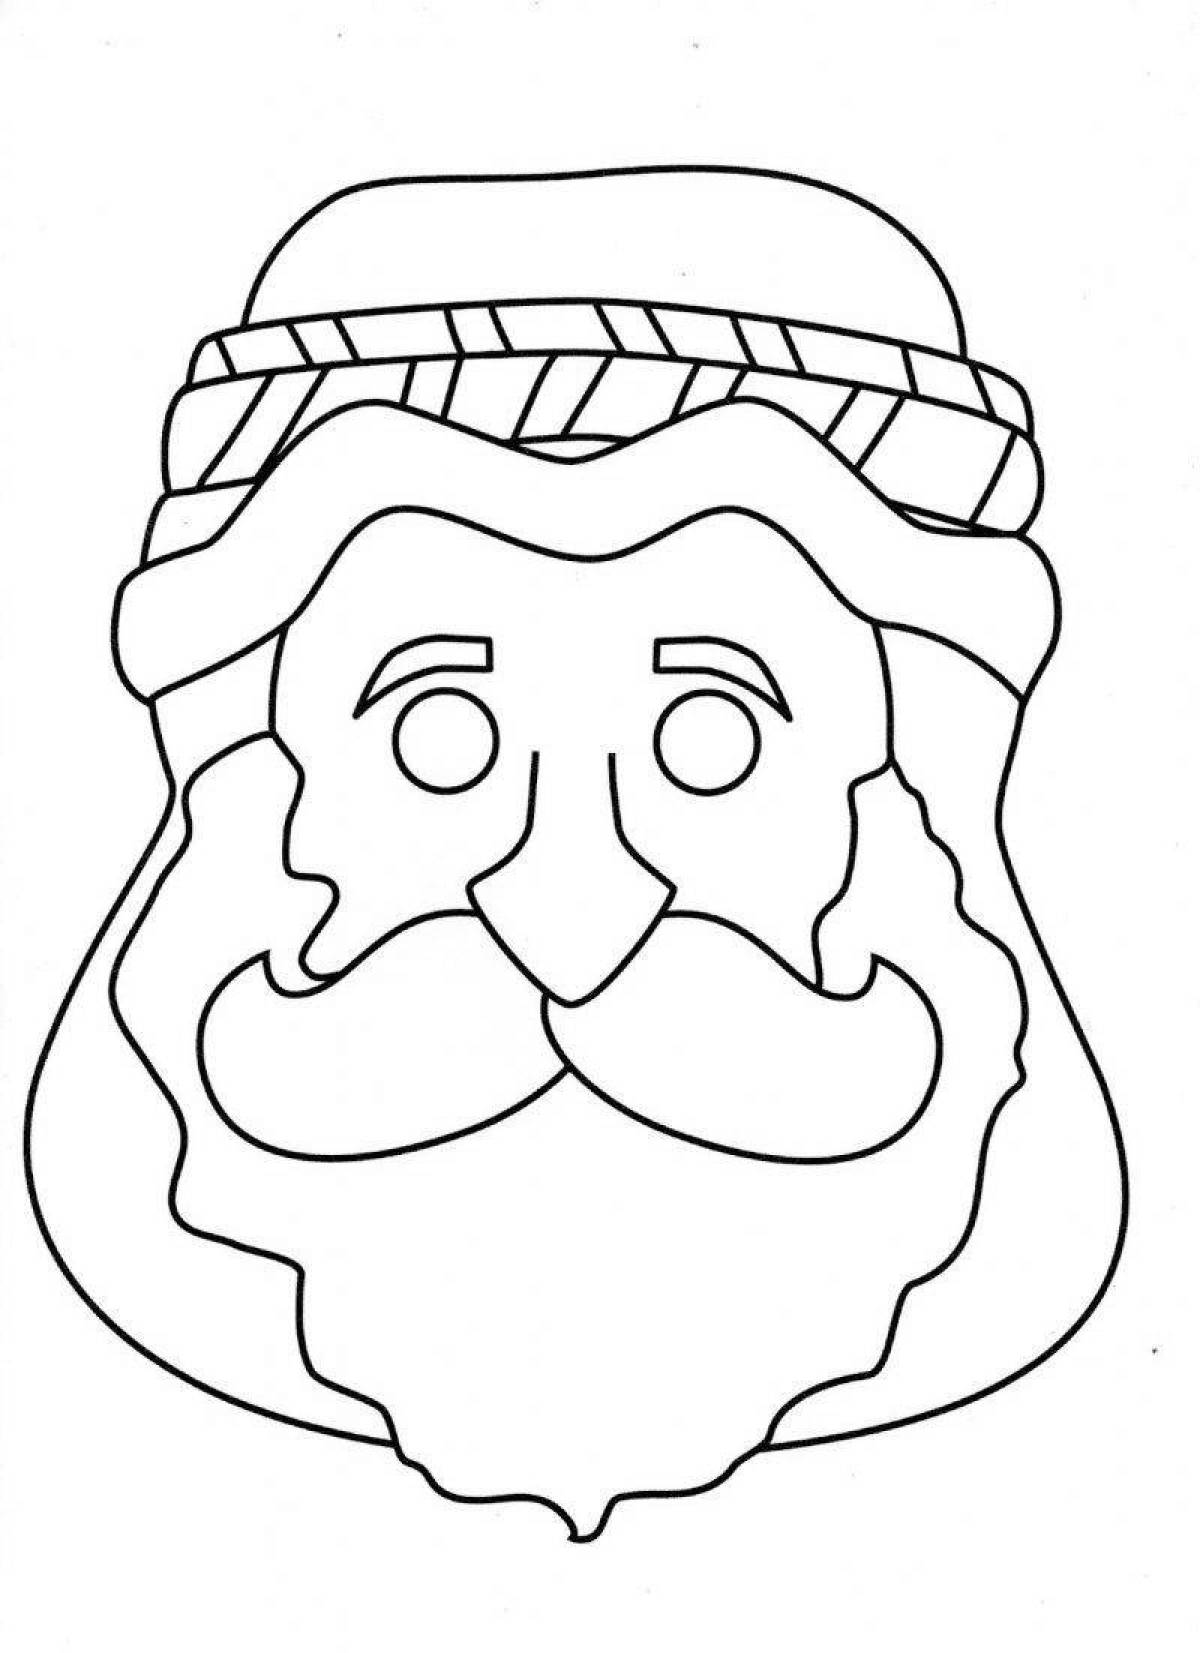 Coloring page funny snowman mask